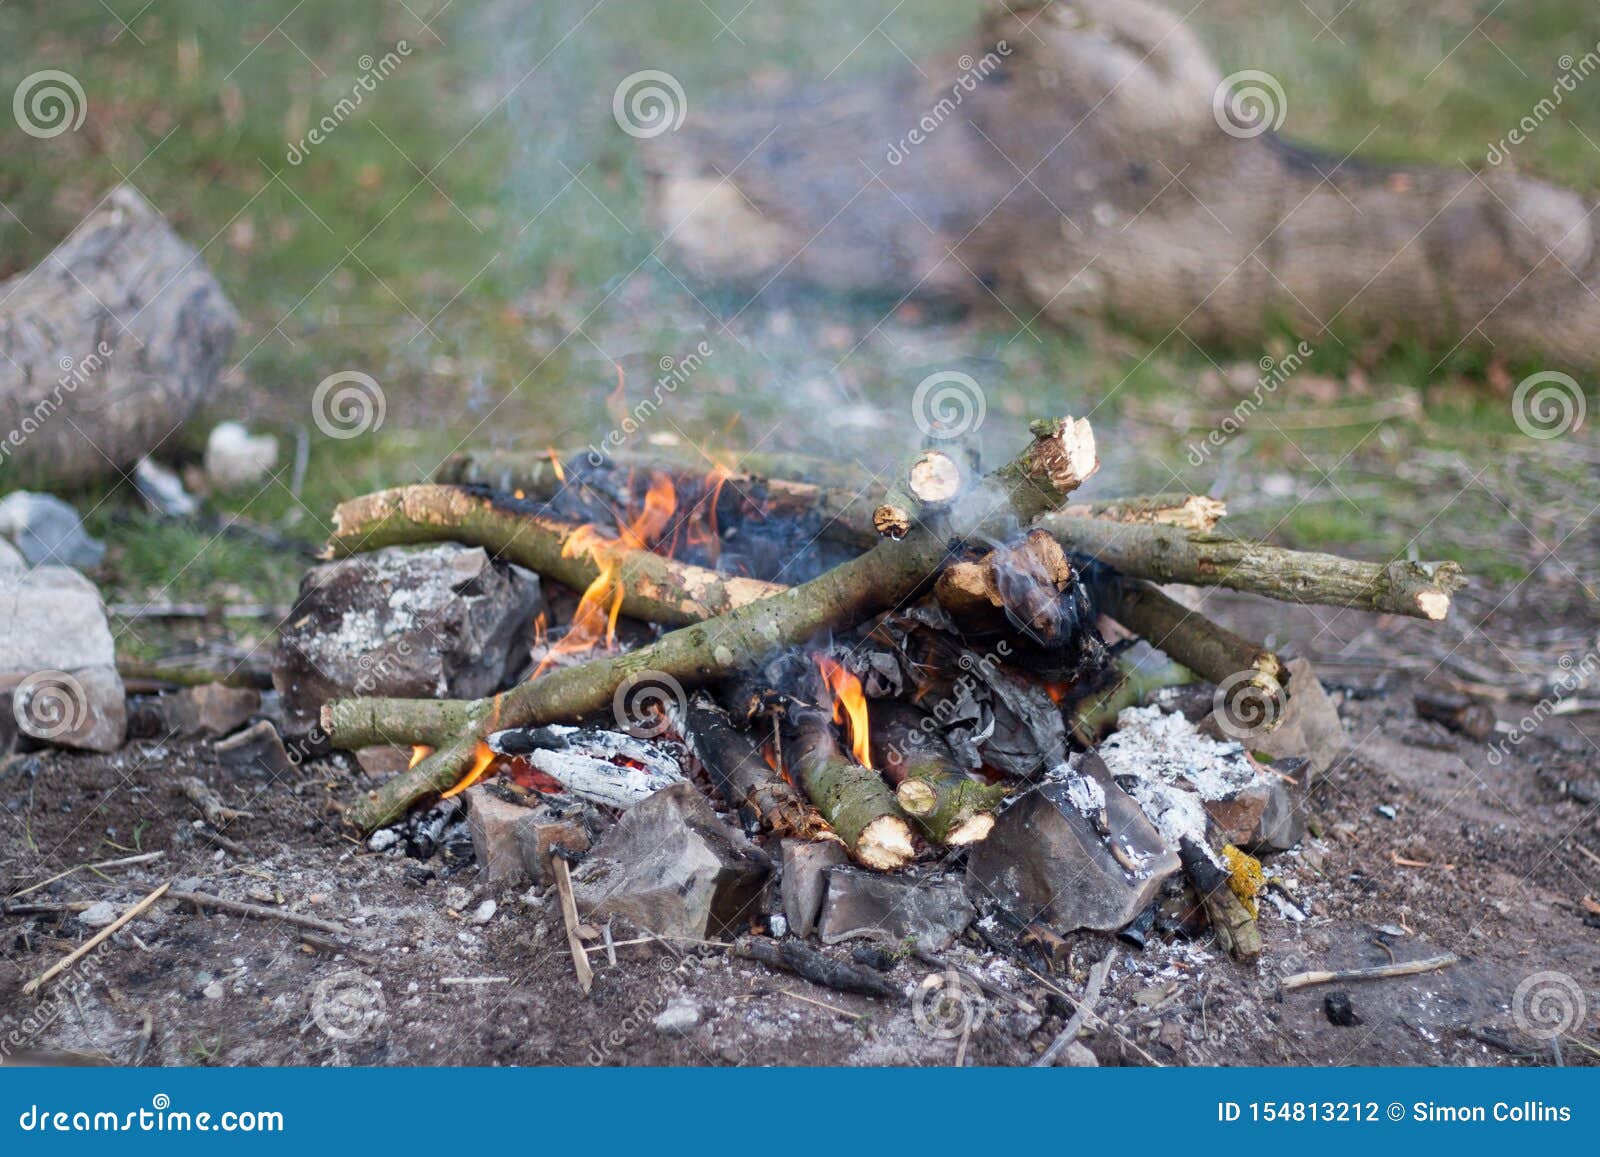 A Small Campfire Made Up of Twigs and Branches with Rocks Surrounding ...